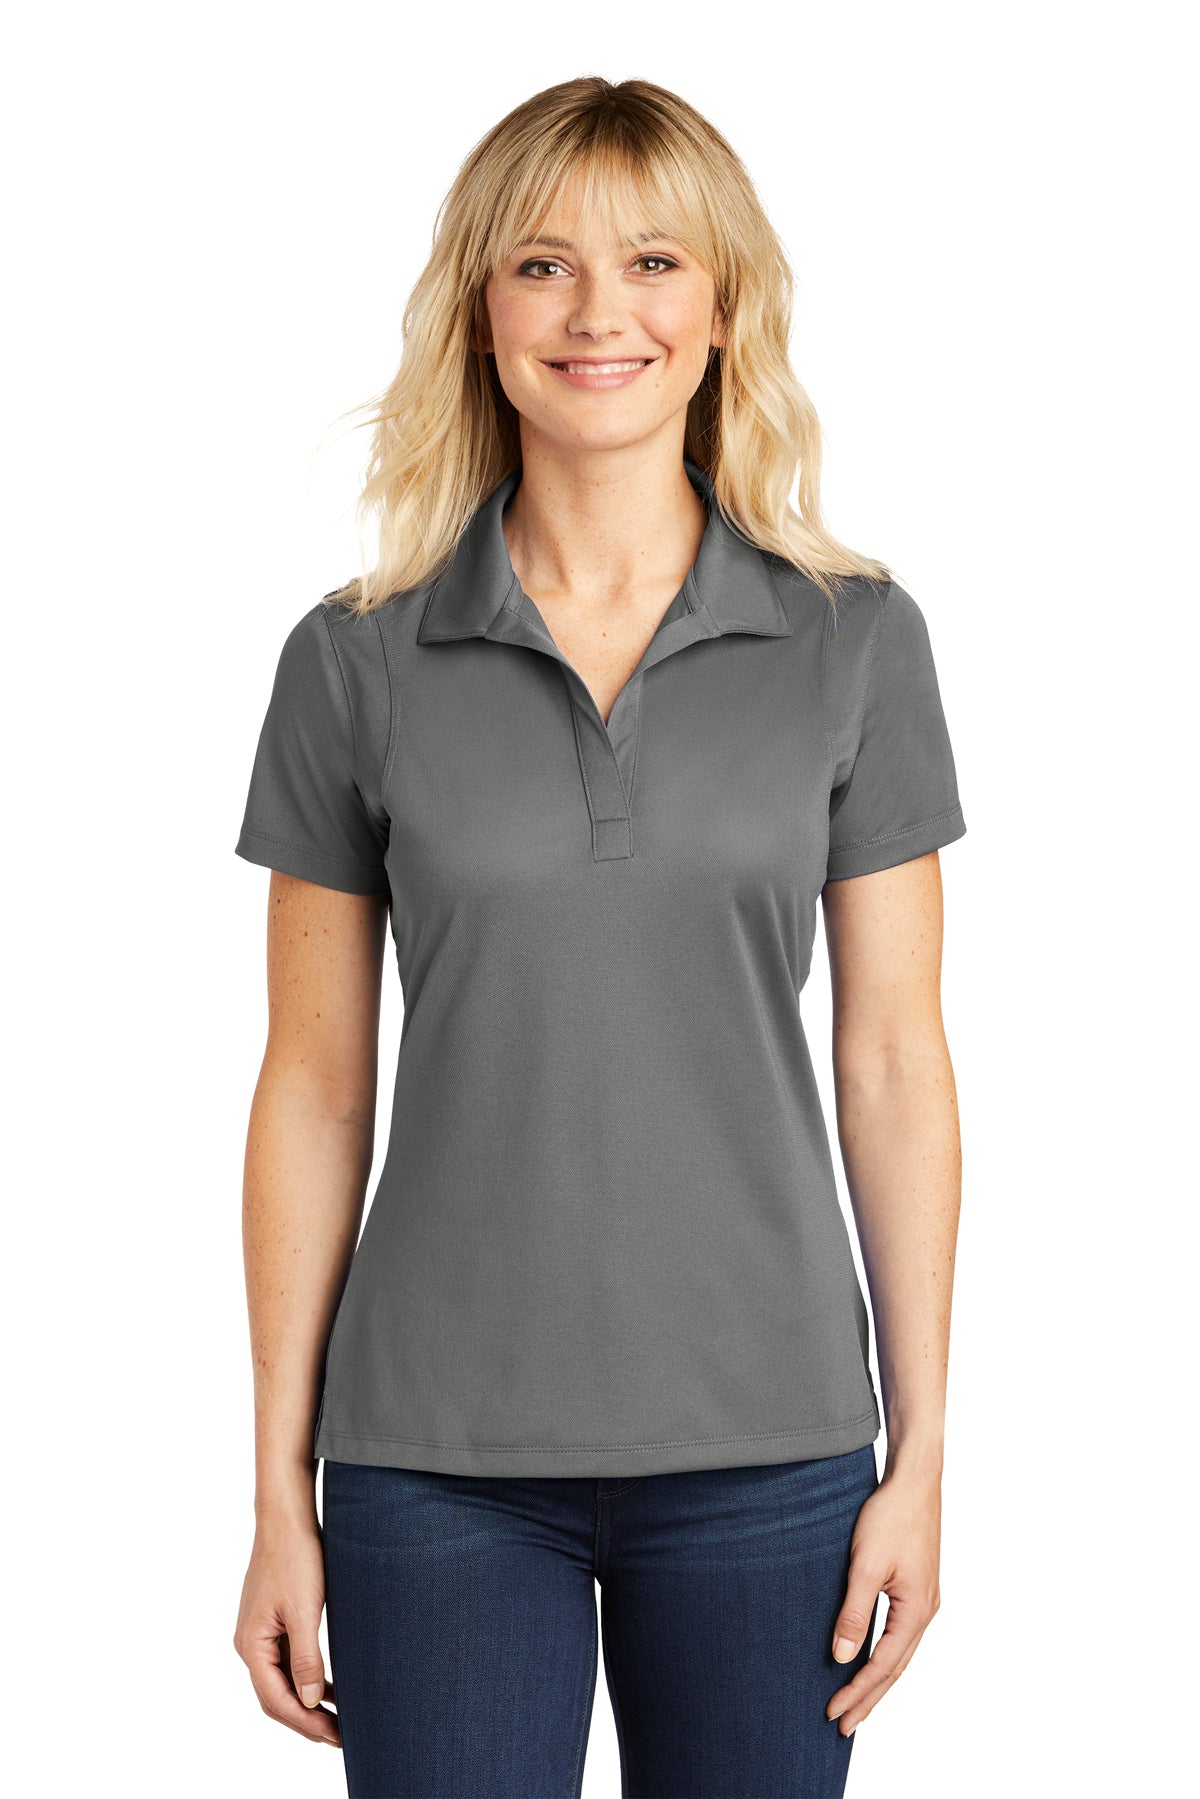 F) STYLE# LST650 LADIES MICROPIQUE POLOS (DULUTH LOGO)